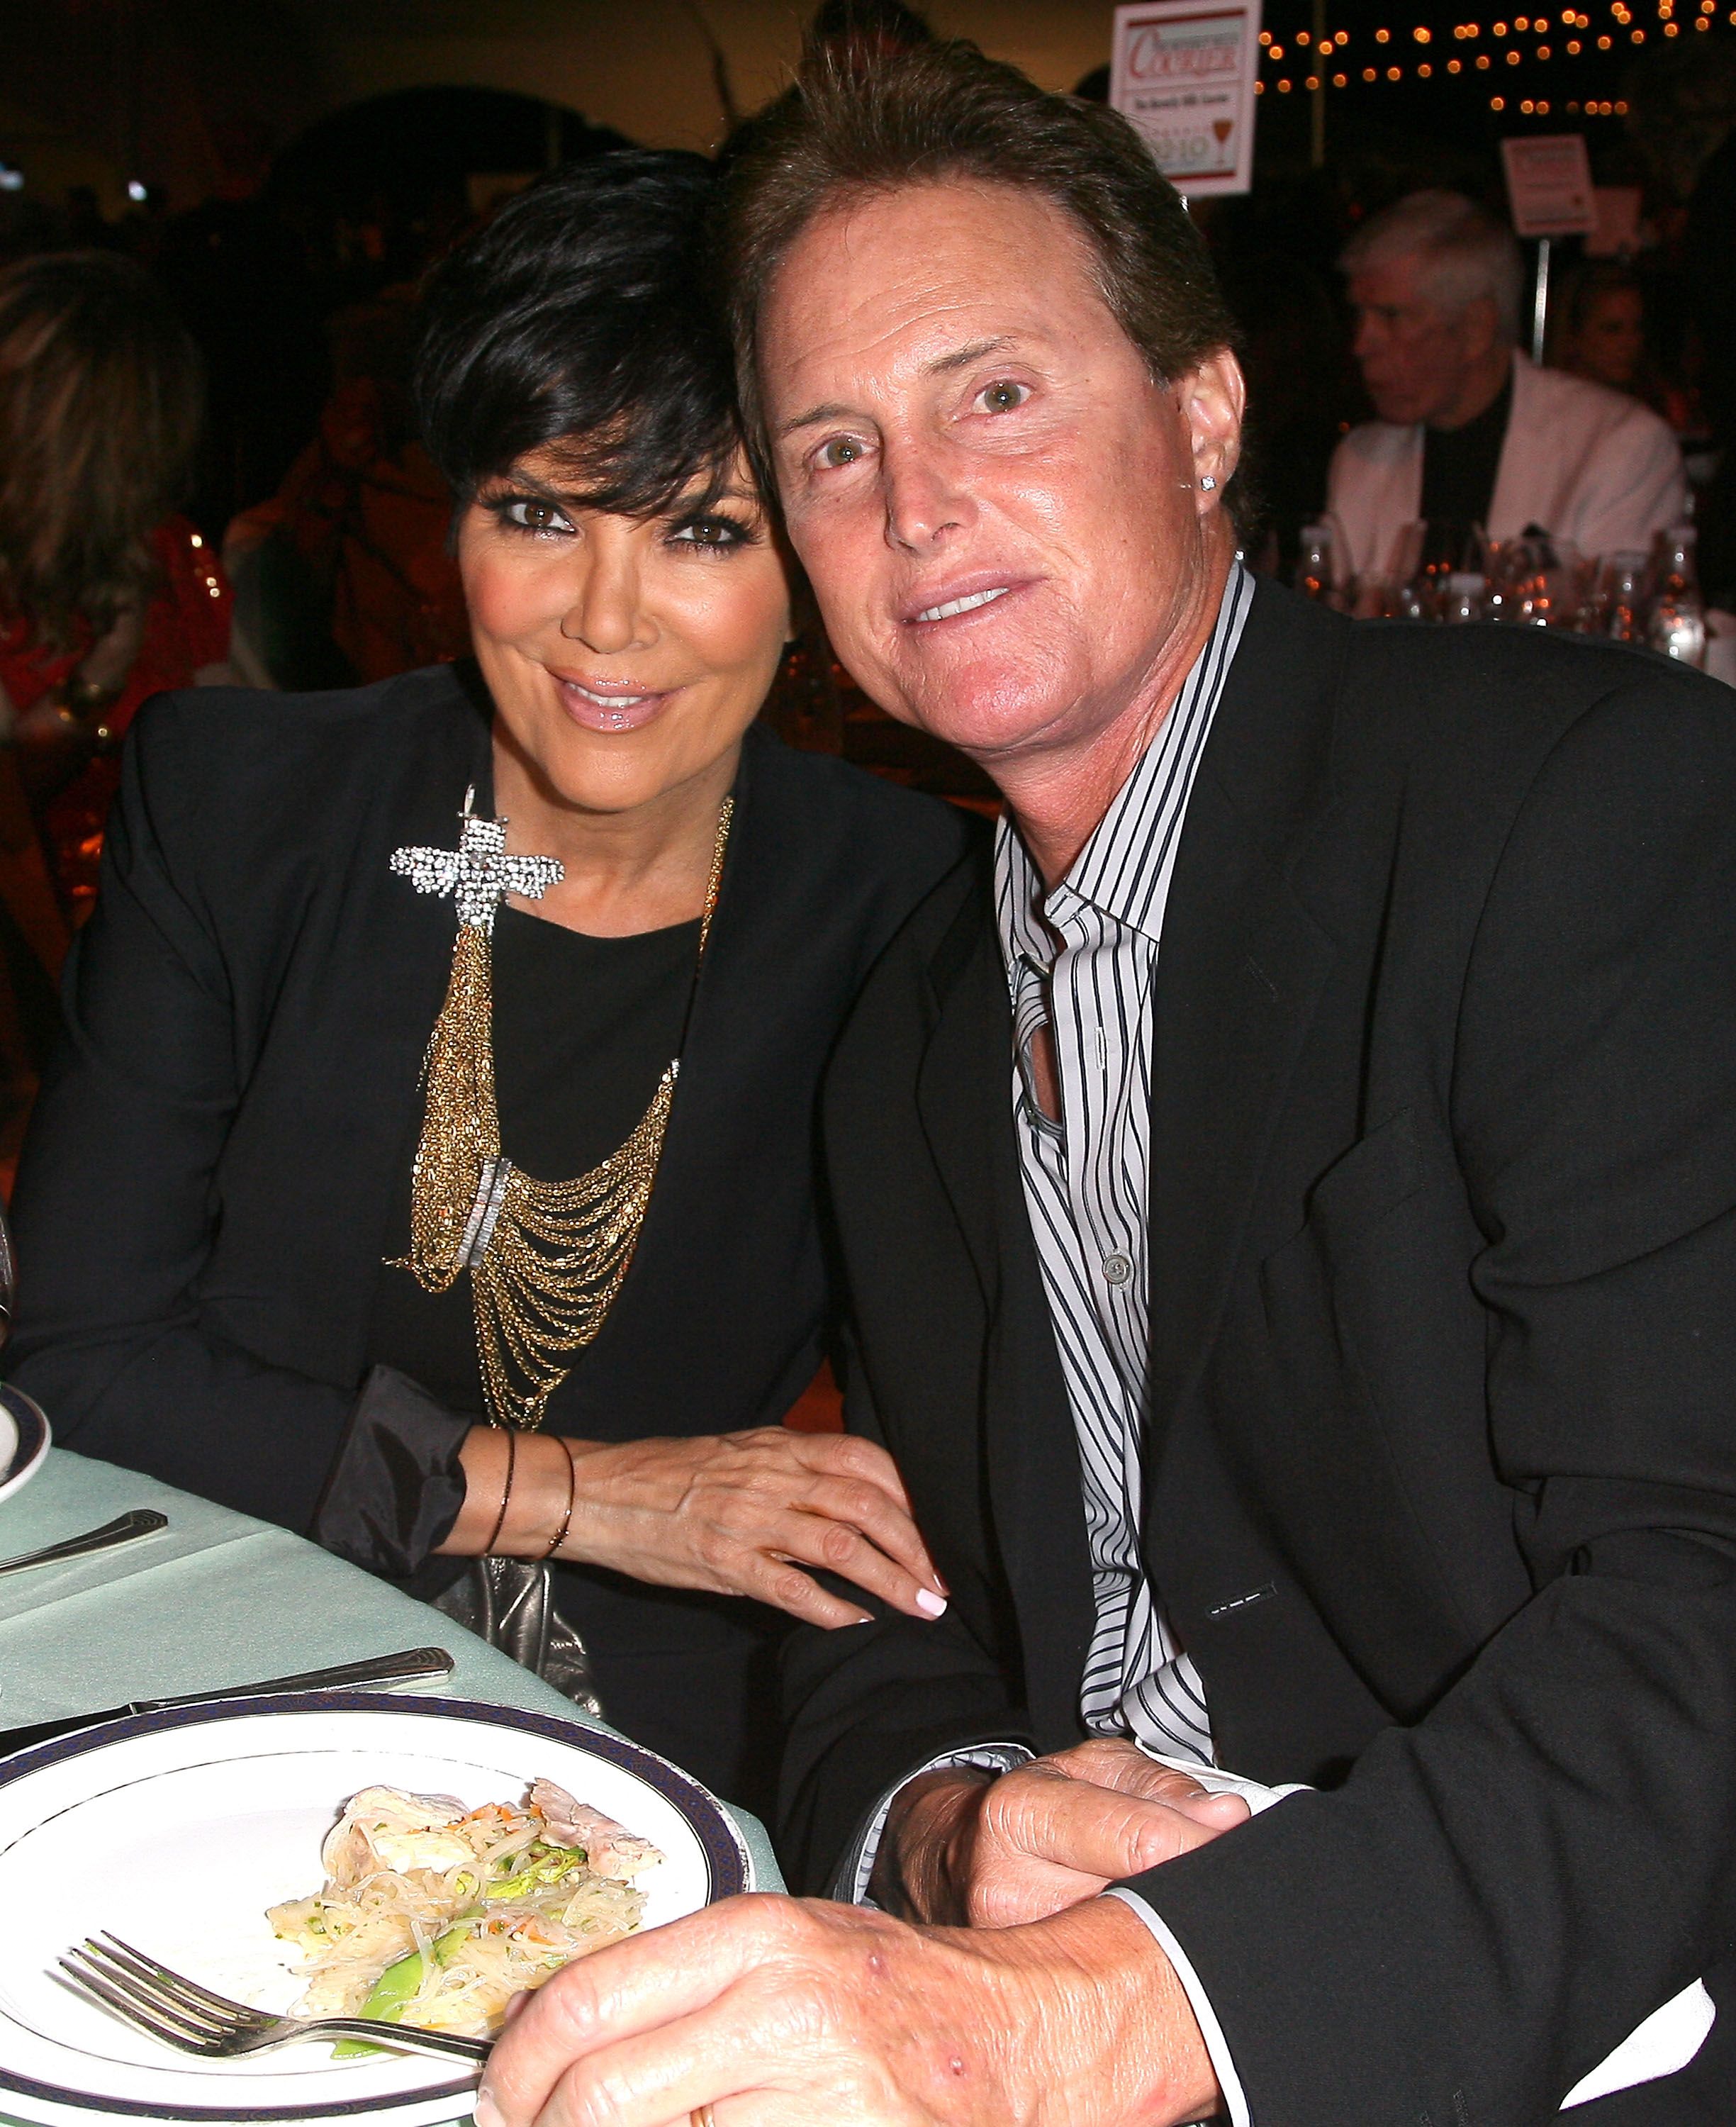 Kris Jenner and Bruce Jenner at the Taste Of Beverly Hills Wine & Food Festival Opening Night on September 2, 2010 in Beverly Hills, California. | Source: Getty Images